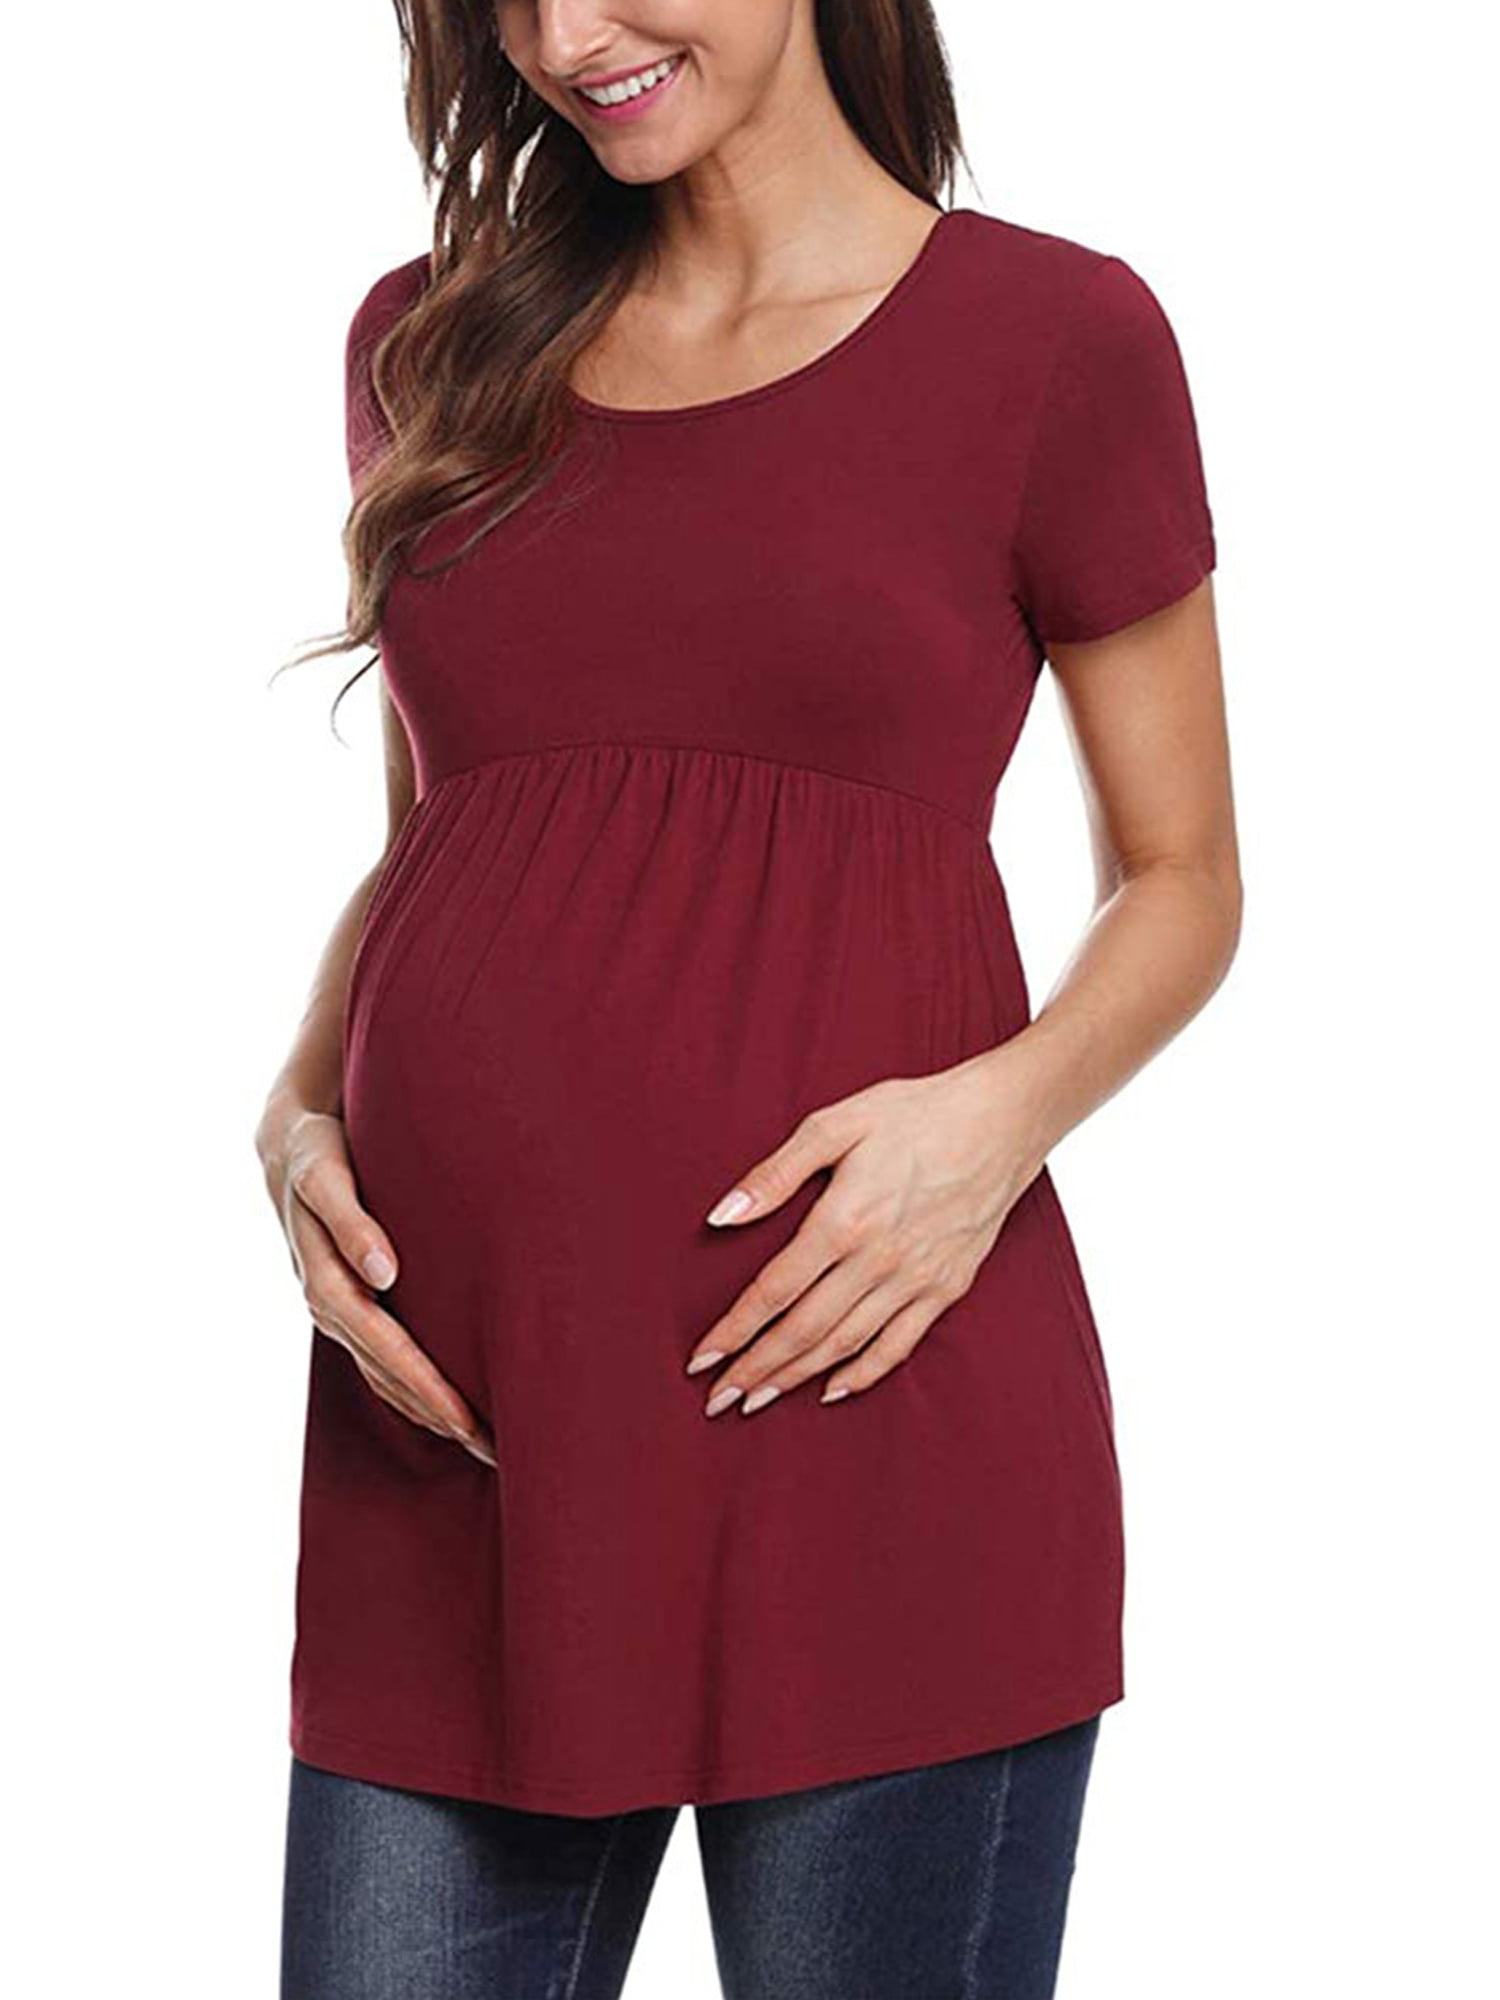 Wine Red Burgundy Short Sleeve Maternity Top Blouse Pregnancy Womens 